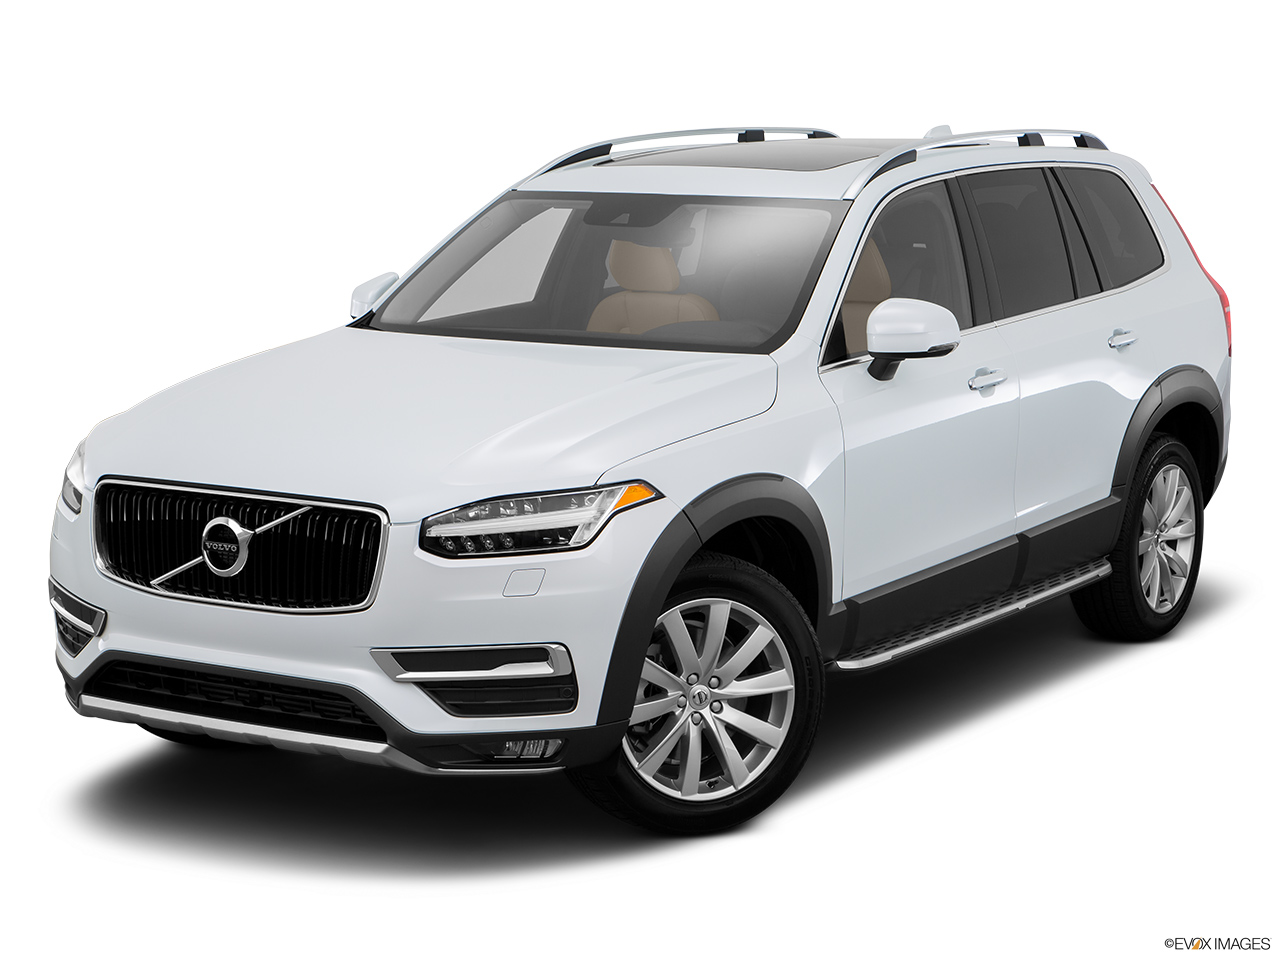 2016 Volvo XC90 T6 AWD Front angle view. 